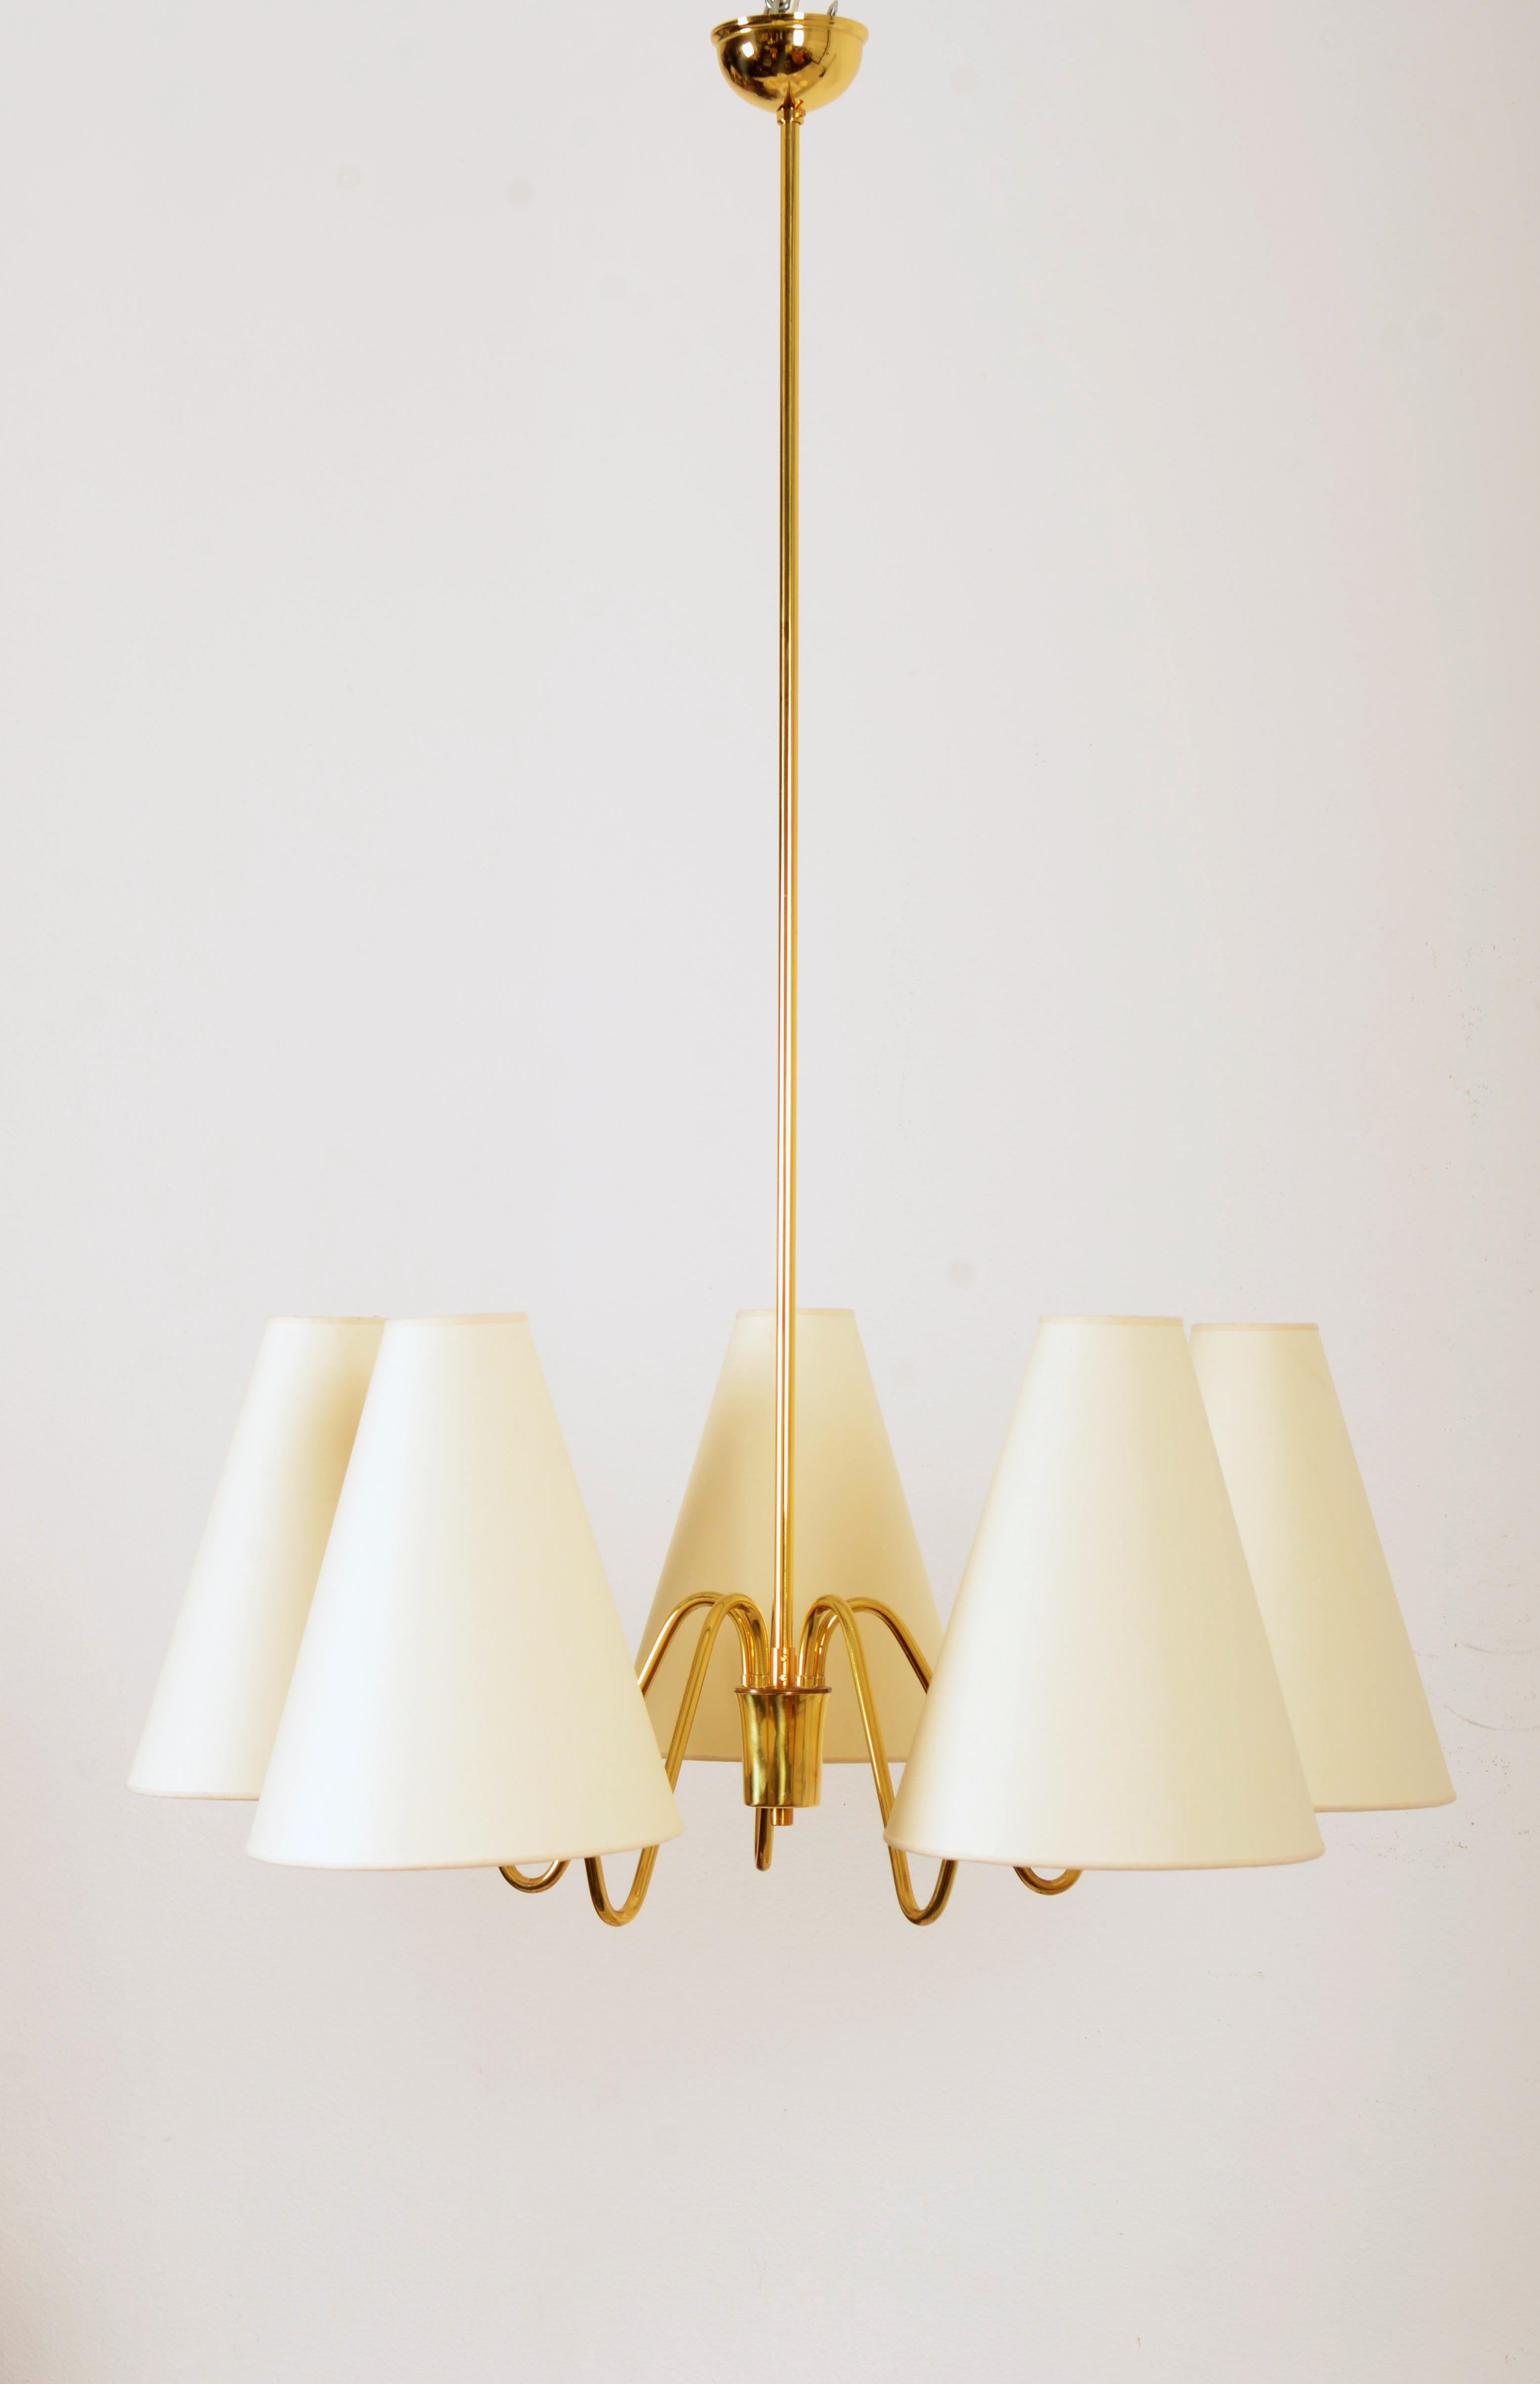 Mid-20th Century Midcentury Brass Chandelier by Rupert Nikoll For Sale